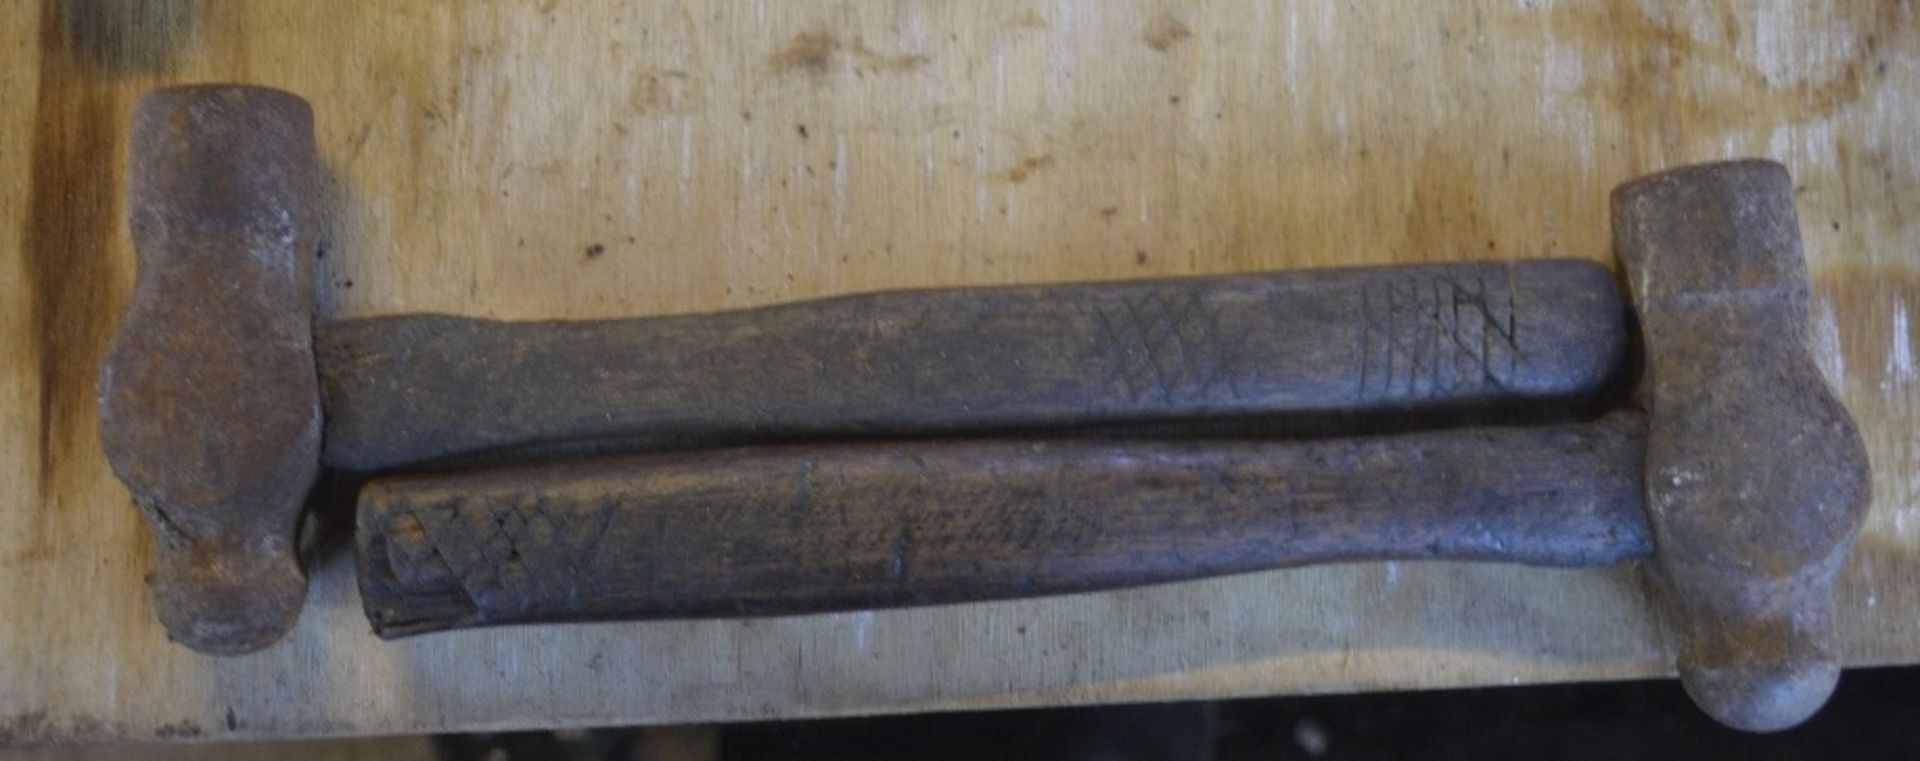 Two vintage wooden handled hammers, each length approx. 12" (2).